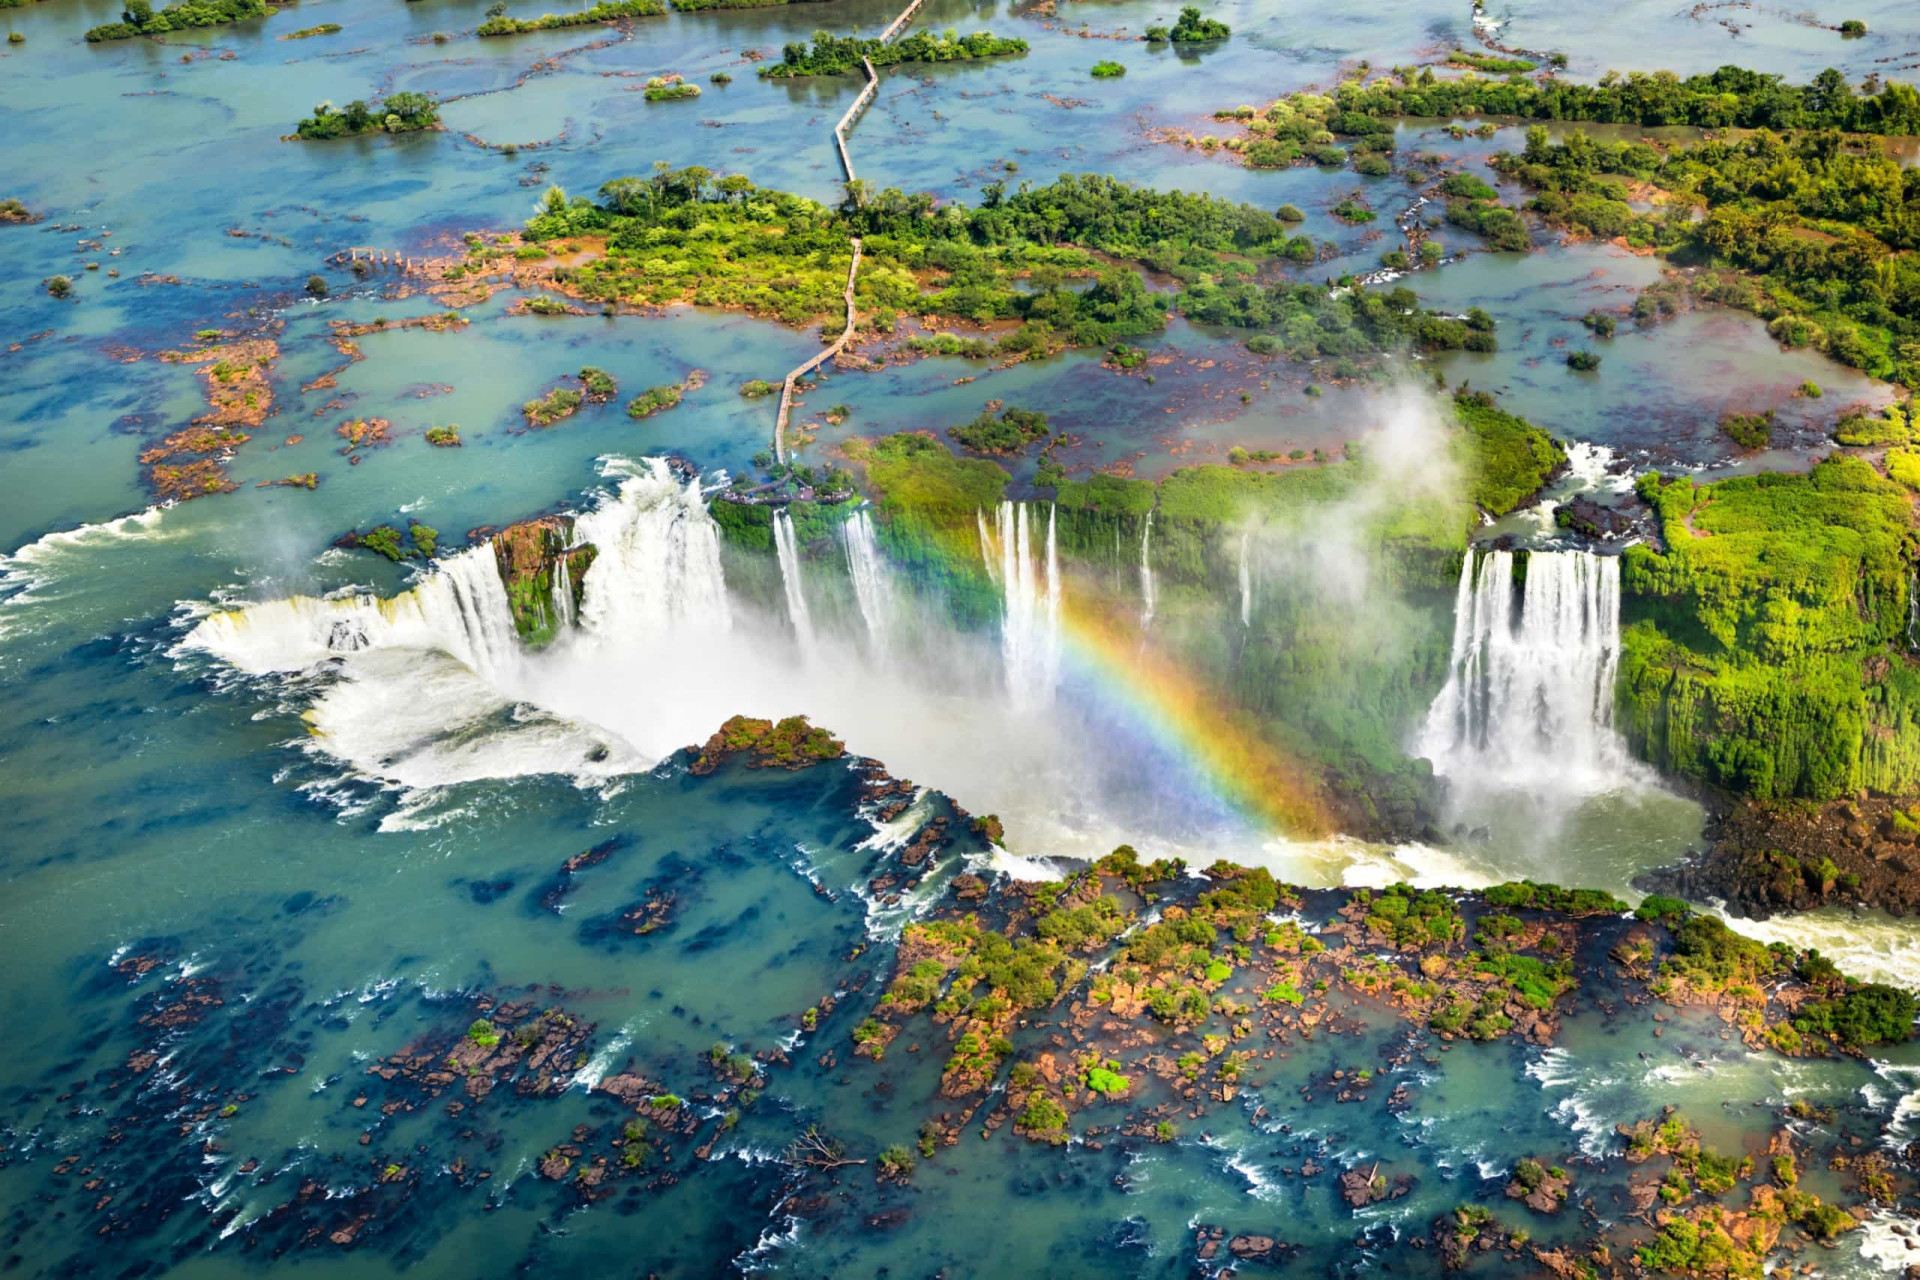 Location: Paraná<br>Criteria: Natural<br>Year established: 1986<br>Description: A world-renowned natural wonder, the park shares with Iguazú National Park in Argentina (same name, and also a UNESCO World Heritage Site, established 1984) one of the planet’s largest waterfalls. The surrounding habitats are home to many rare and endangered species of flora and fauna.<p><a href="https://www.msn.com/en-us/community/channel/vid-7xx8mnucu55yw63we9va2gwr7uihbxwc68fxqp25x6tg4ftibpra?cvid=94631541bc0f4f89bfd59158d696ad7e">Follow us and access great exclusive content every day</a></p>